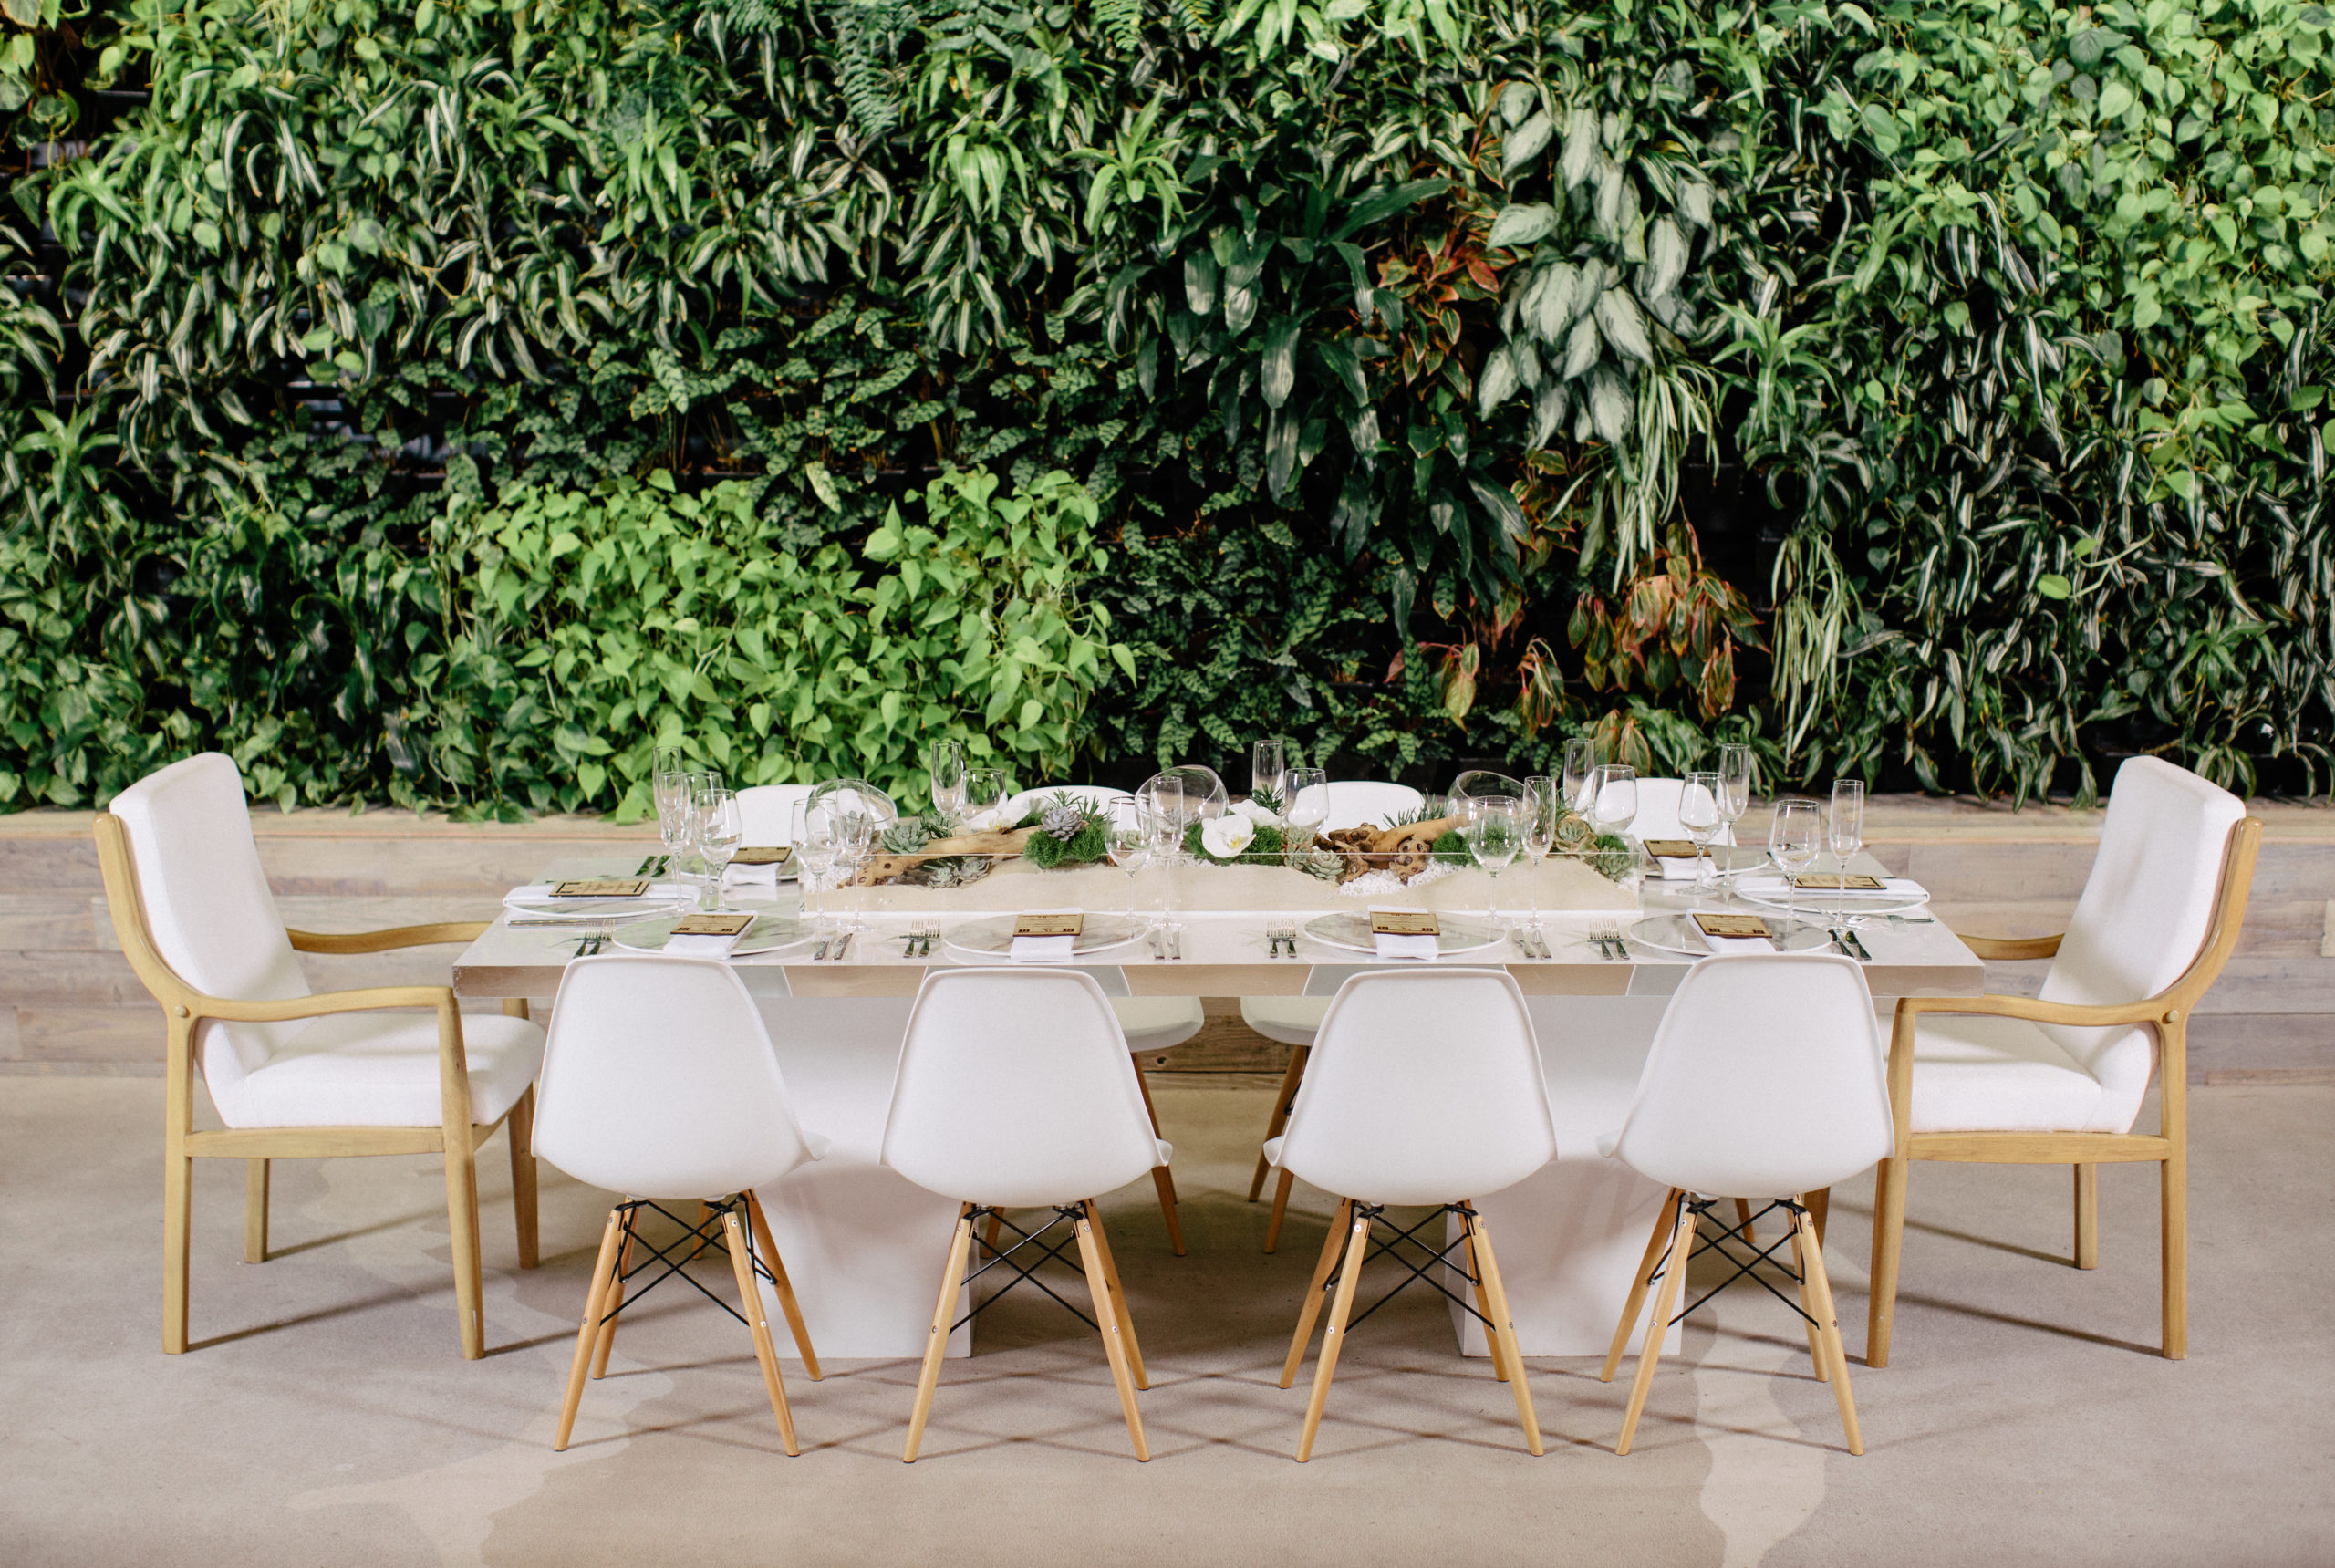 Acrylic wedding table with white wood dowel chairs and statement chairs at either end, featuring marble charger plates and resin name plates that served as unique place cards with a wood engraved menu buckle